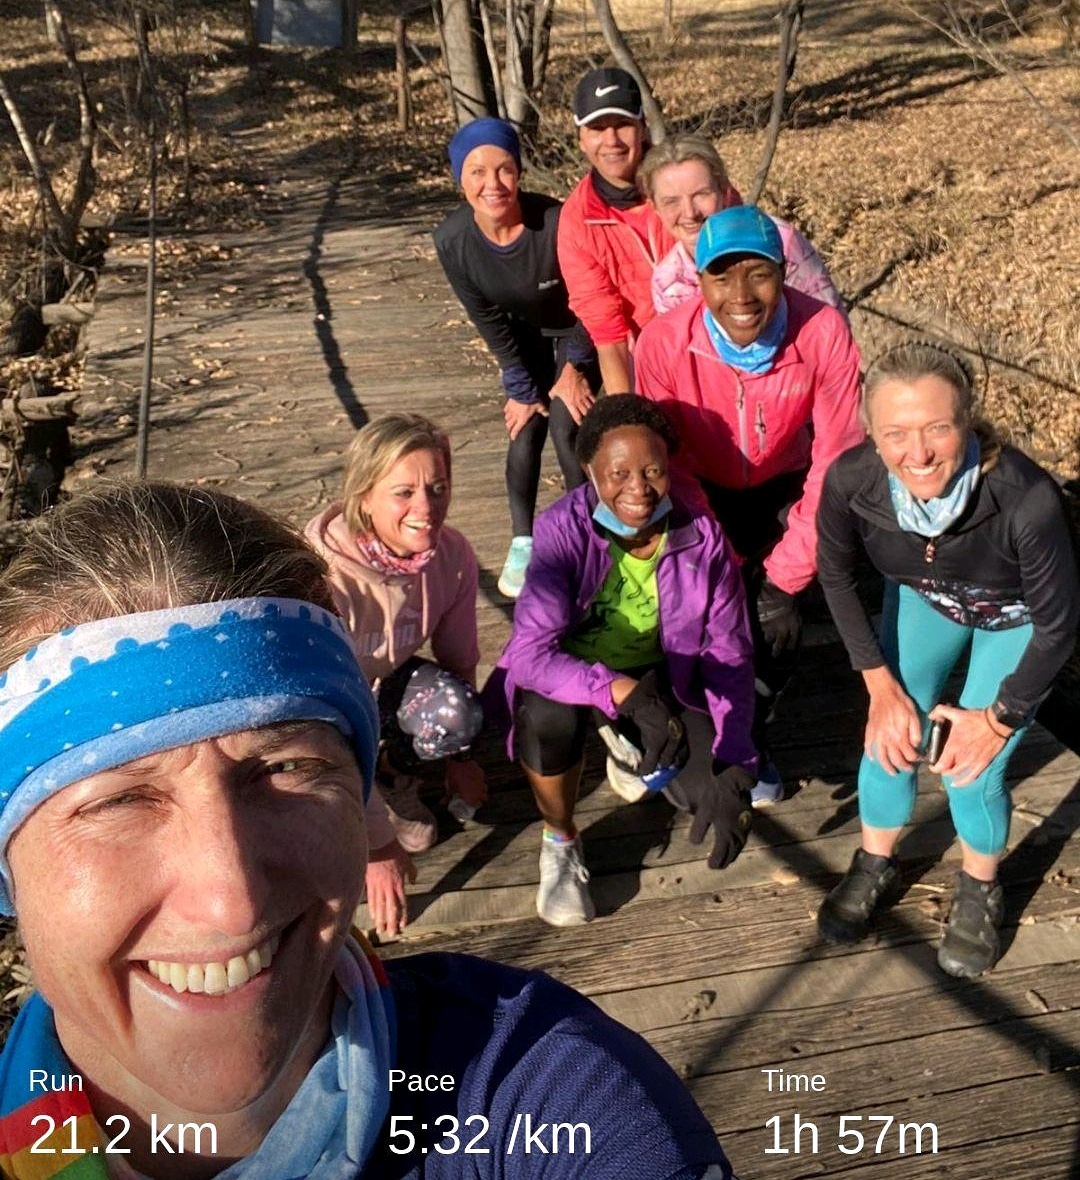 A good half marathon with my elites family 🏃🏼‍♀️🏃🏼‍♀️🏃🏼‍♀️🏃🏼‍♀️🏃🏼‍♀️🏃🏼‍♀️🏃🏼‍♀️🏃🏼‍♀️🏃🏼‍♀️🏃🏼‍♀️
What a freezing one. We ran at minus 2 degrees.

#RunnersWorld 
#MorningRunners
#FetchYourBody2021 
#RunningWithTumiSole